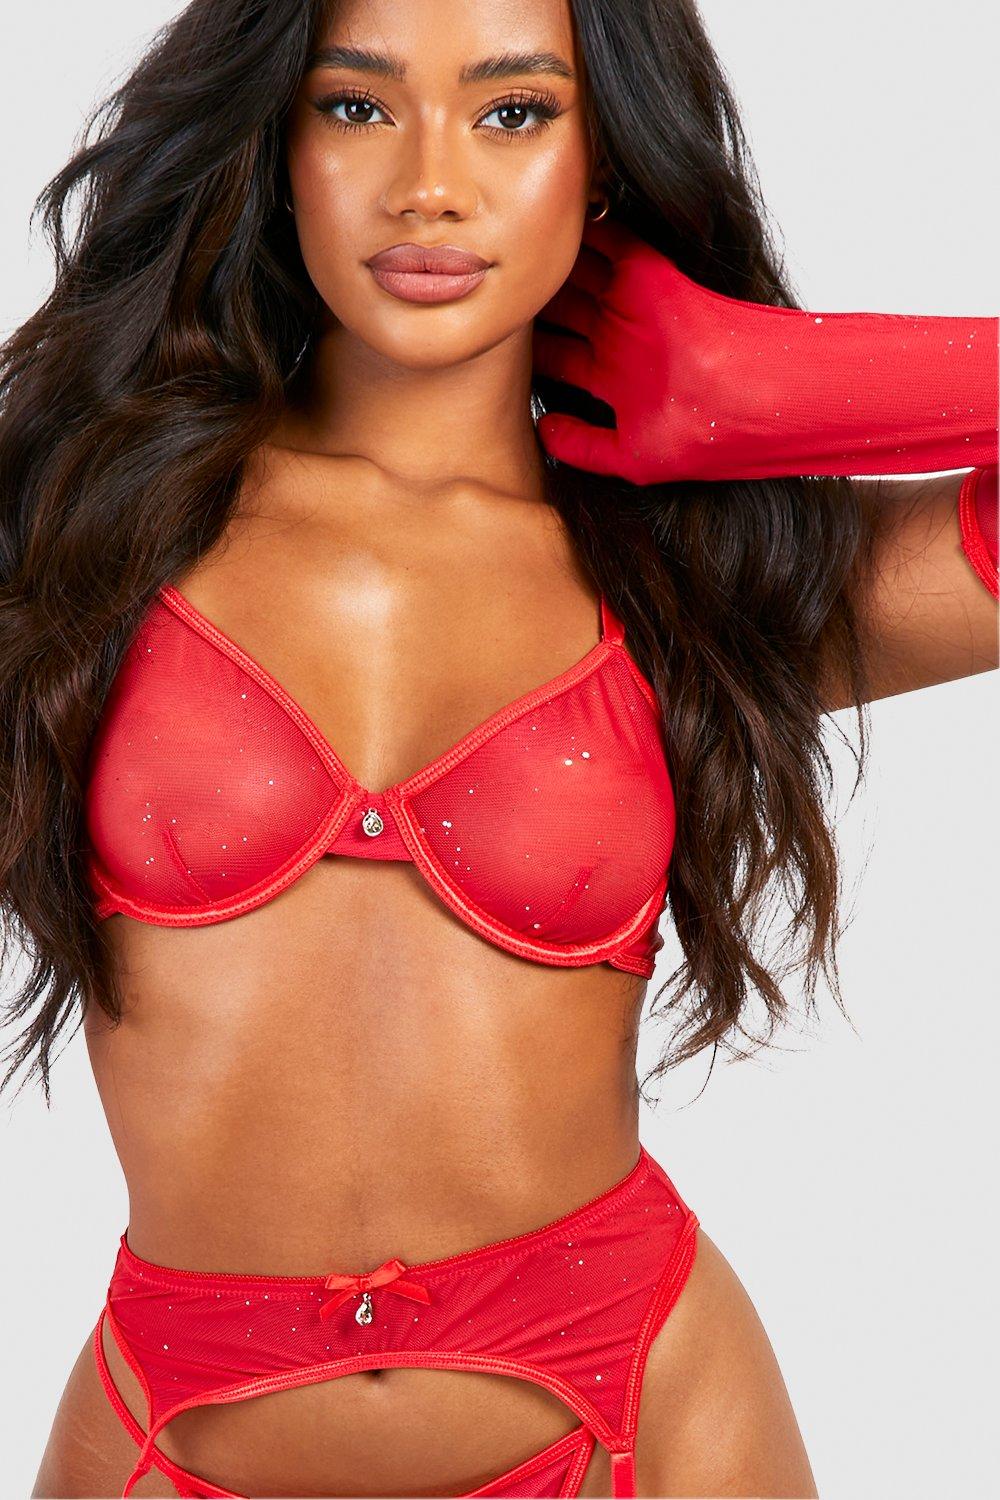 https://media.boohoo.com/i/boohoo/gzz70632_red_xl_2/female-red-sparkle-lingerie-and-suspender-set-with-gloves-